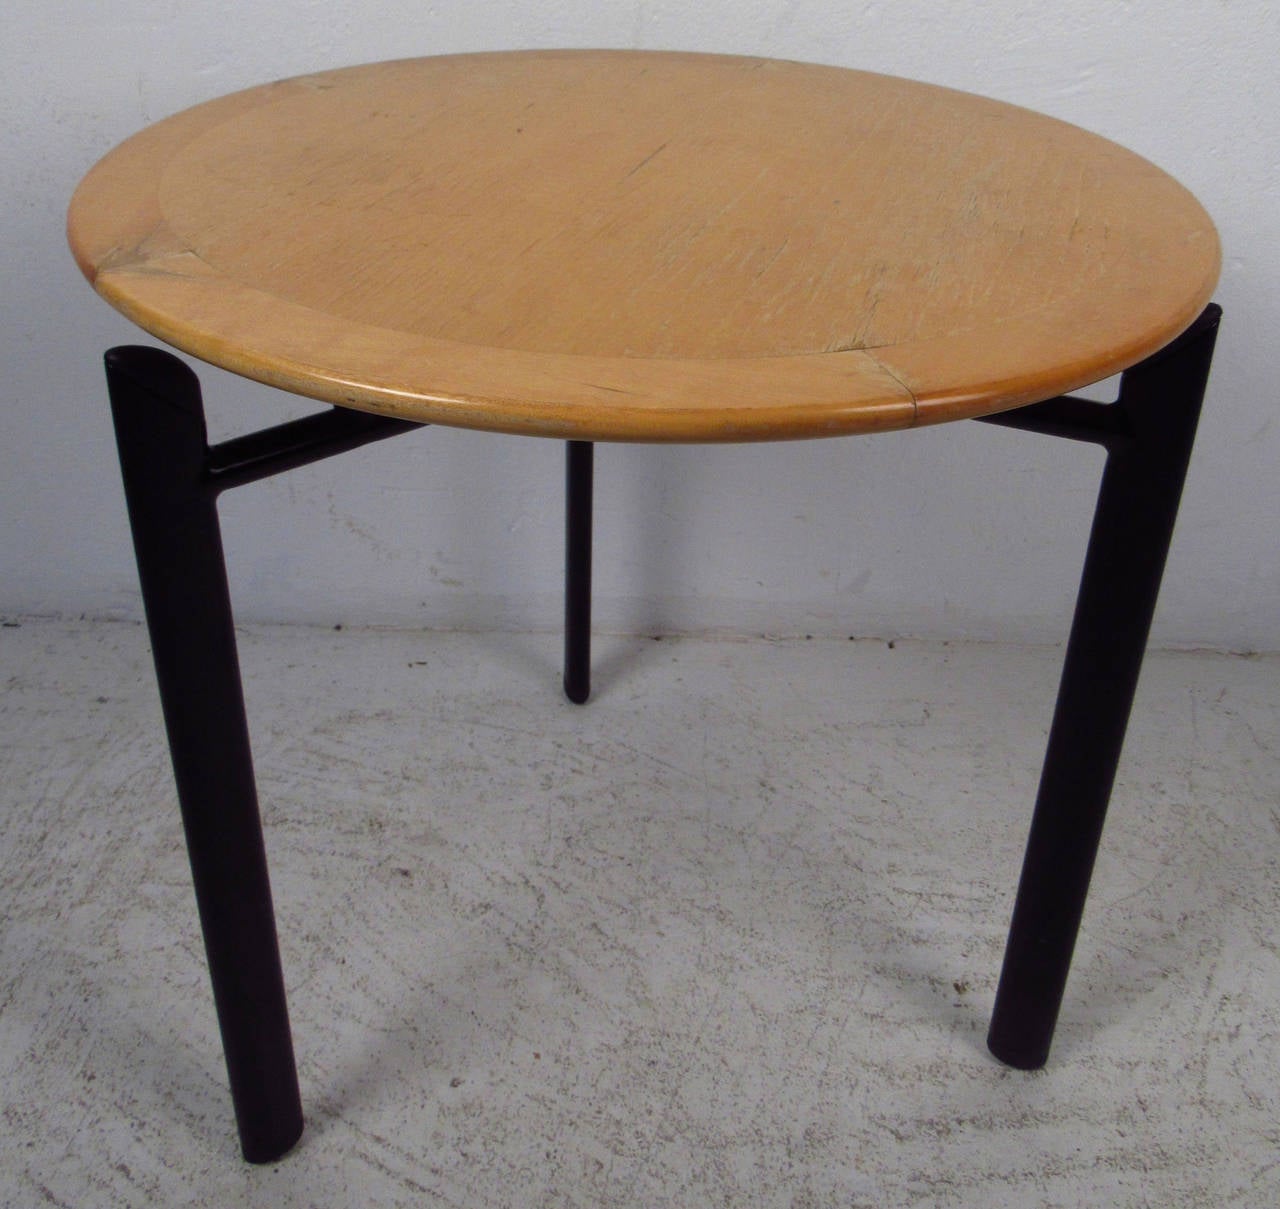 This vintage end table features a sturdy sculpted black metal base with a round maple top. Manufactured by Haworth in Canada, this stylish floating top end table makes a fantastic addition to any seating area. Functional as a side table, end table,